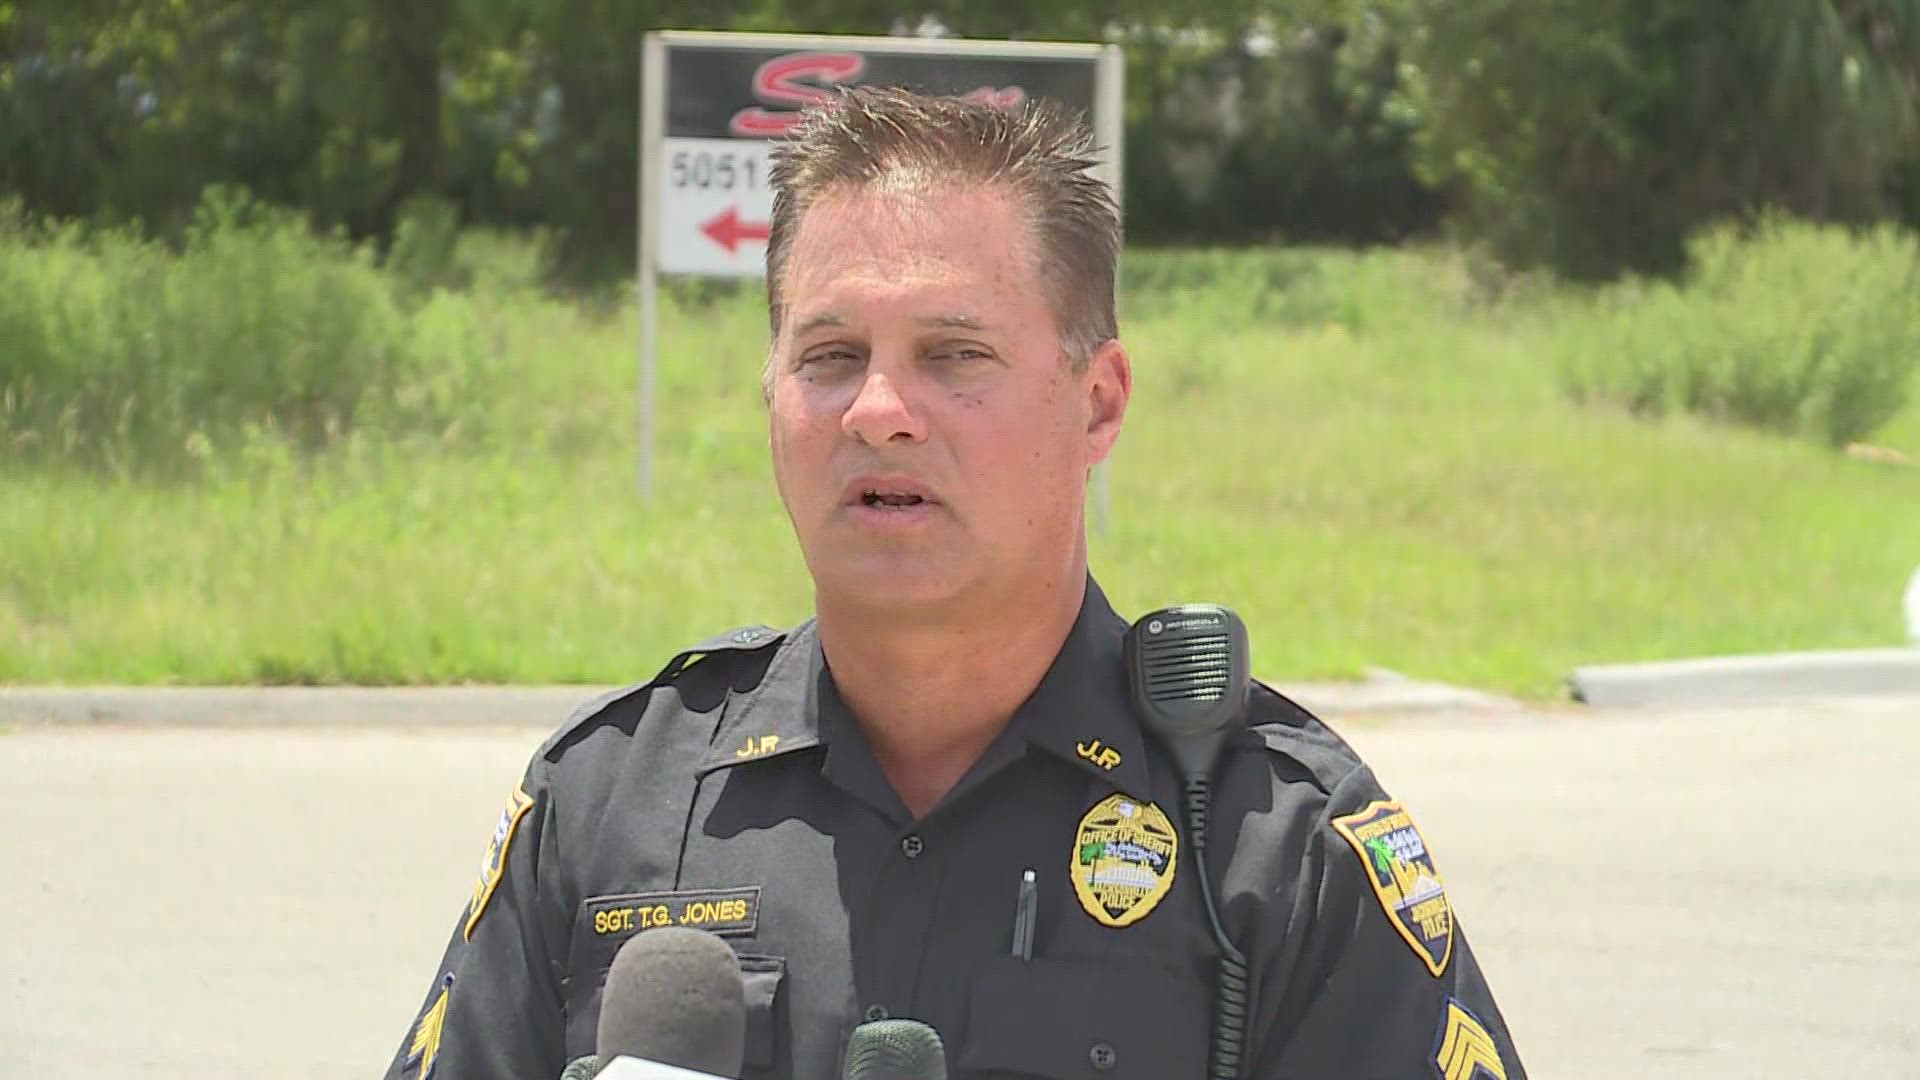 JSO Sergeant Jones briefed media about a shooting early Friday morning in the Northwest area.